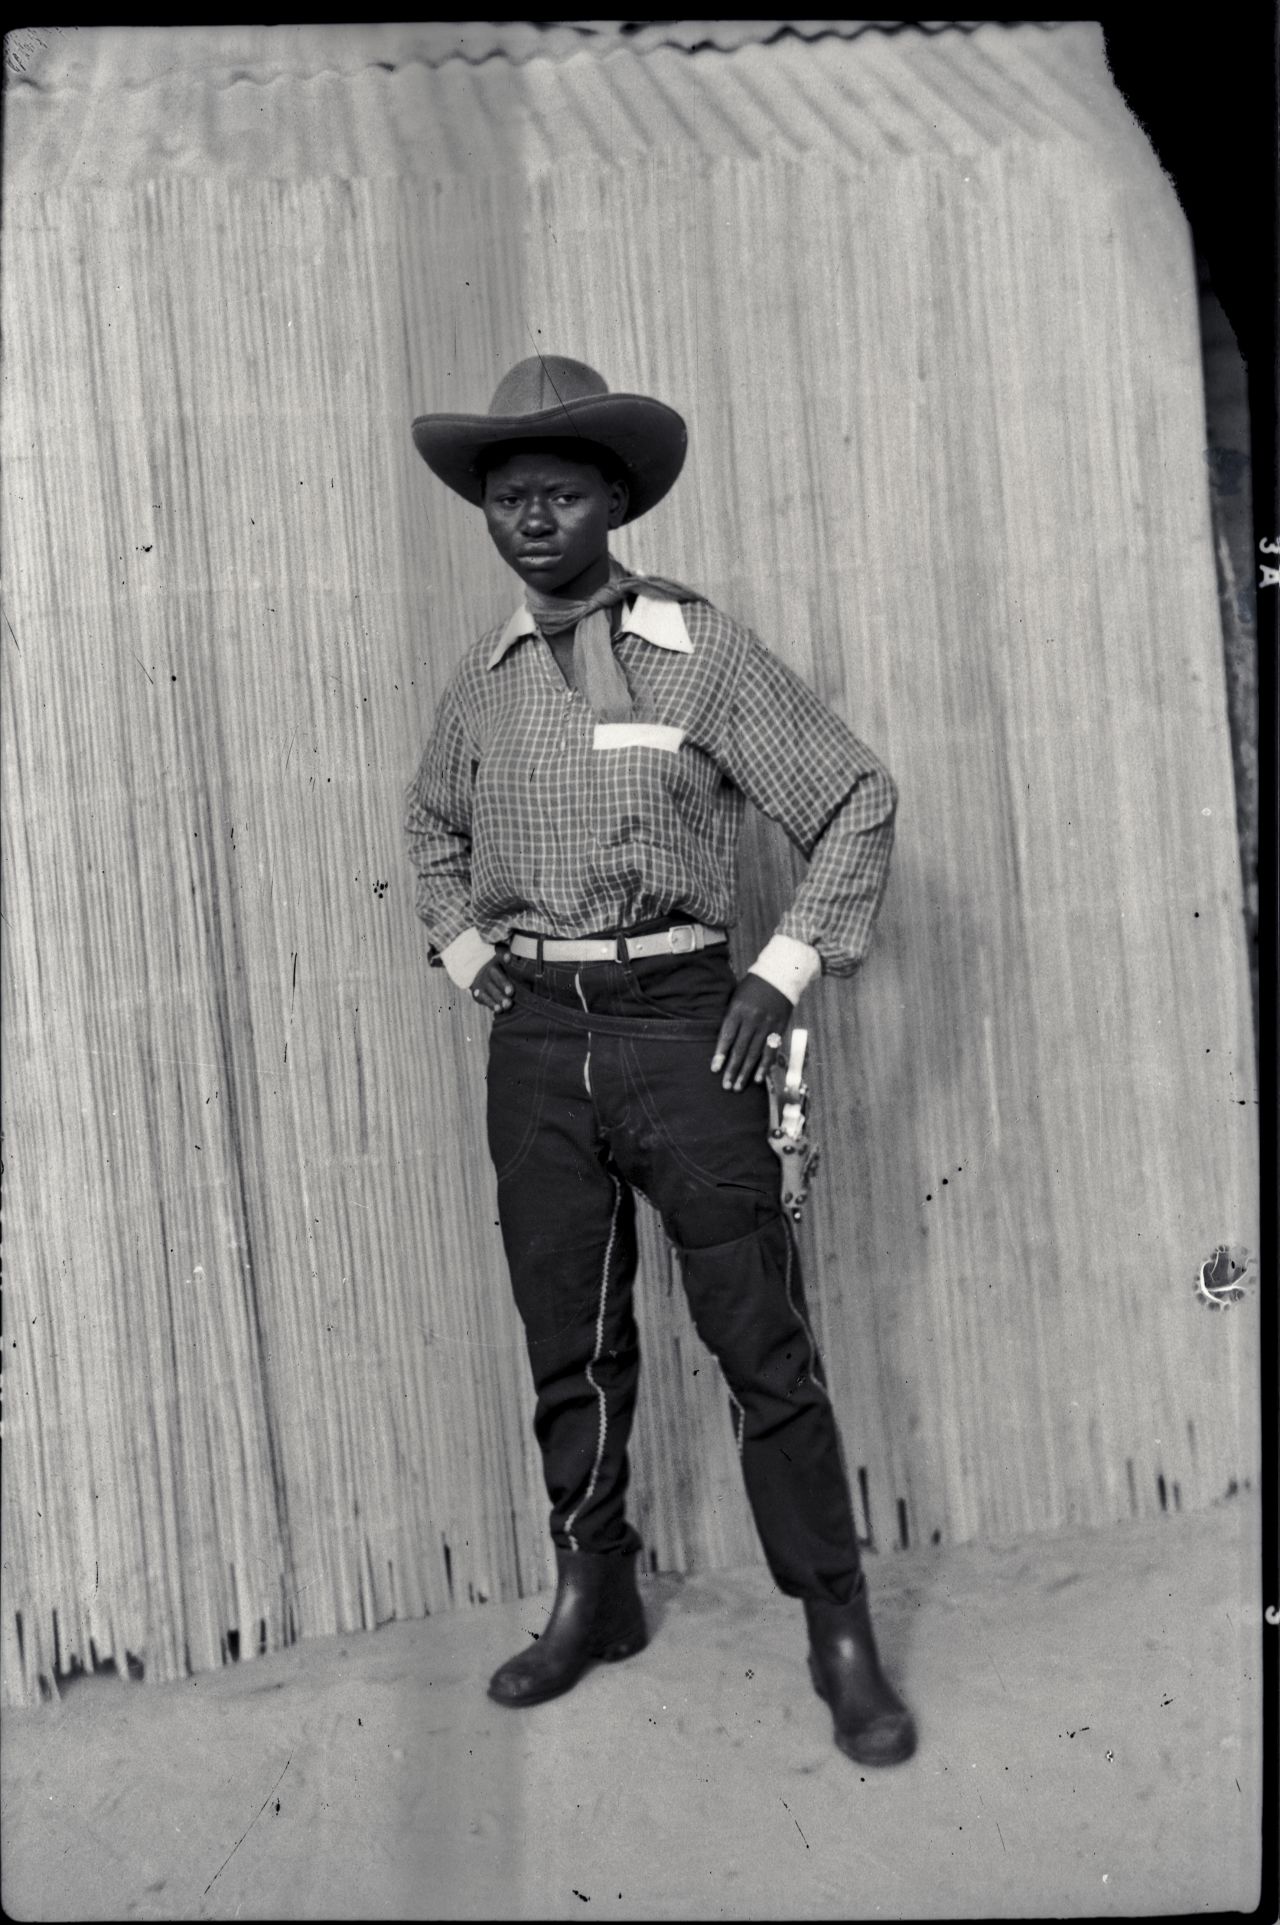 (Meta, one of the female Bills, in full cowboy gear with a toy gun.) The Bills were seen as both protectors and predators. Gang disputes were frequent, and although none of the Bills were armed, they were known as fierce fighters with quick wits.